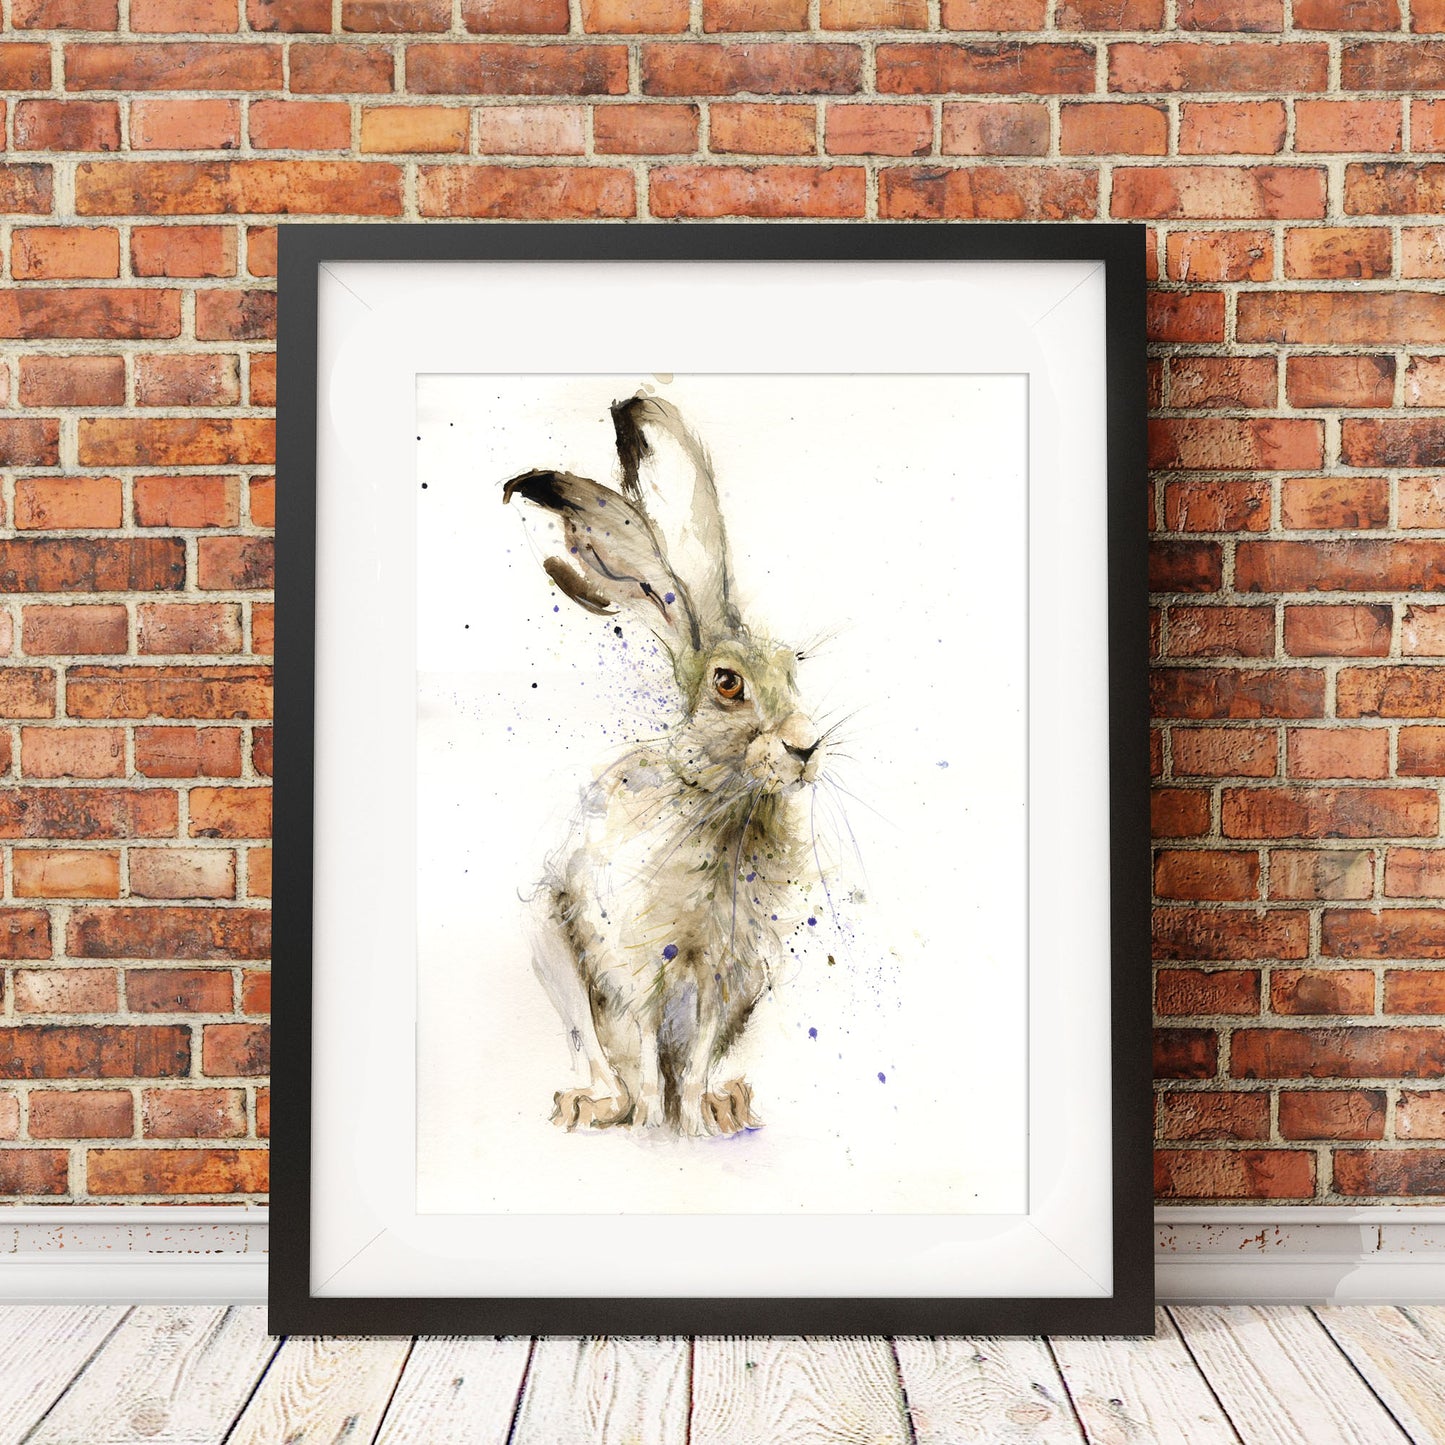 Limited edition hare print "Harry" - Jen Buckley Art limited edition animal art prints